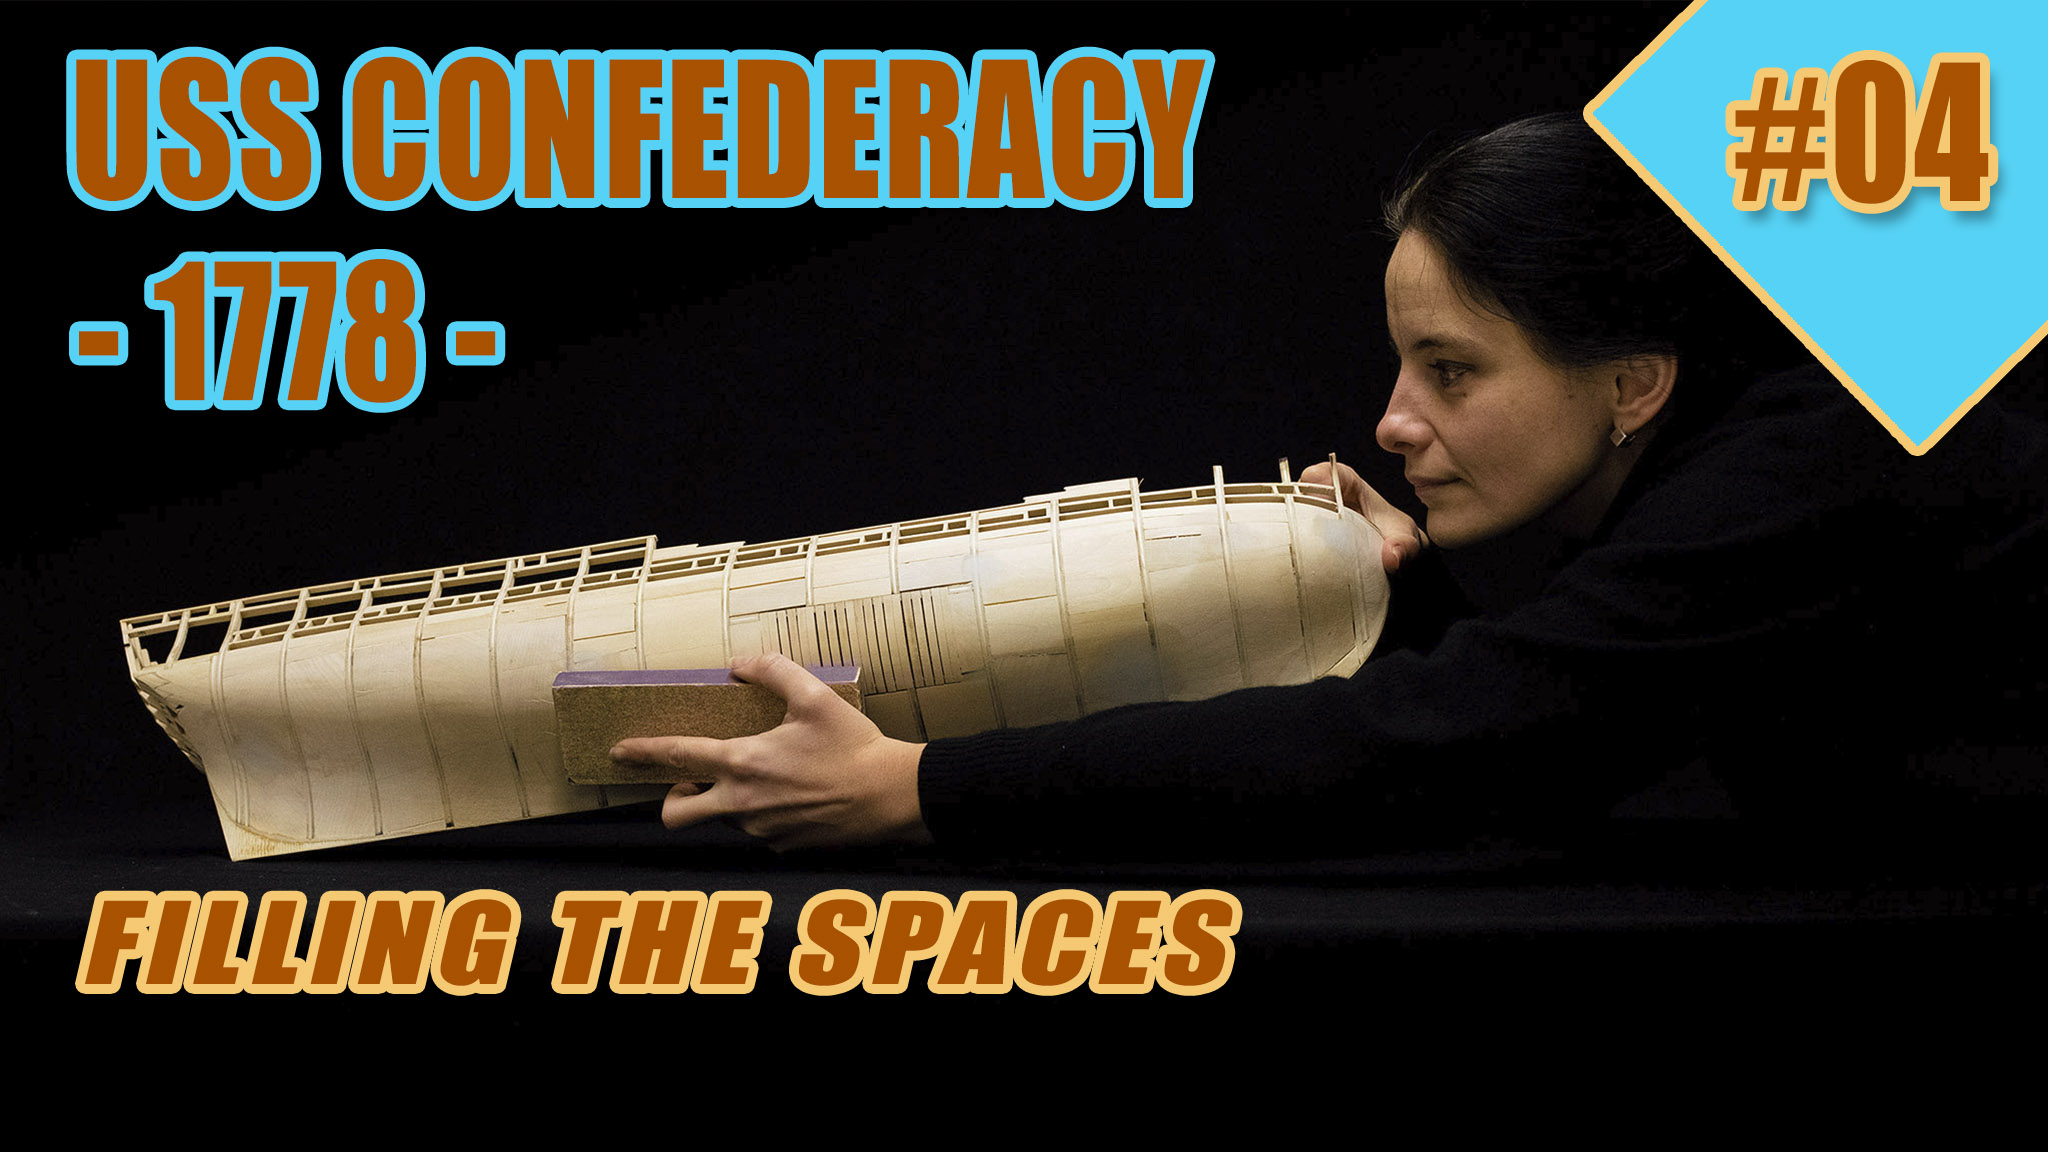 04-TITTLE-CONFEDERACY - Filling the spaces copy.jpg